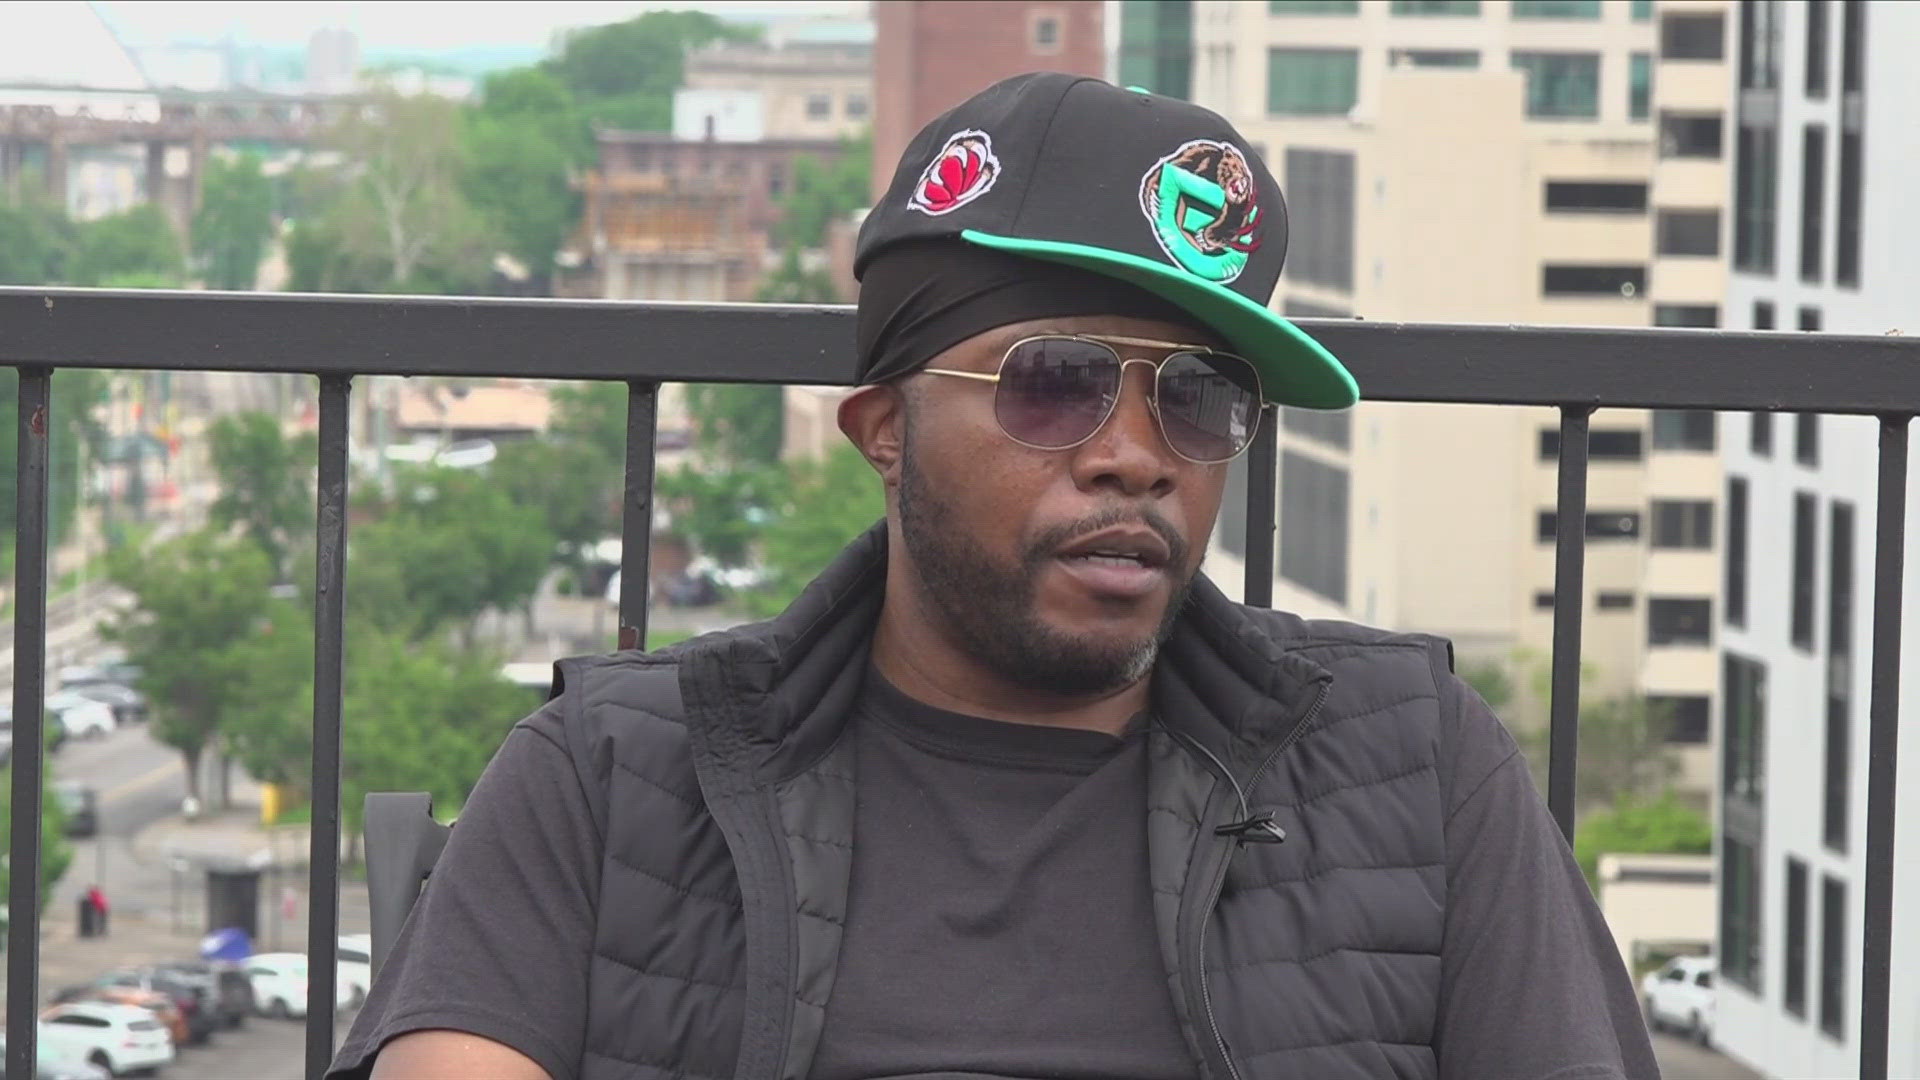 Memphis-born rapper, writer and producer Al Kapone spoke with ABC24 about his road to the big leagues of music and how he works to inspire aspiring artists.